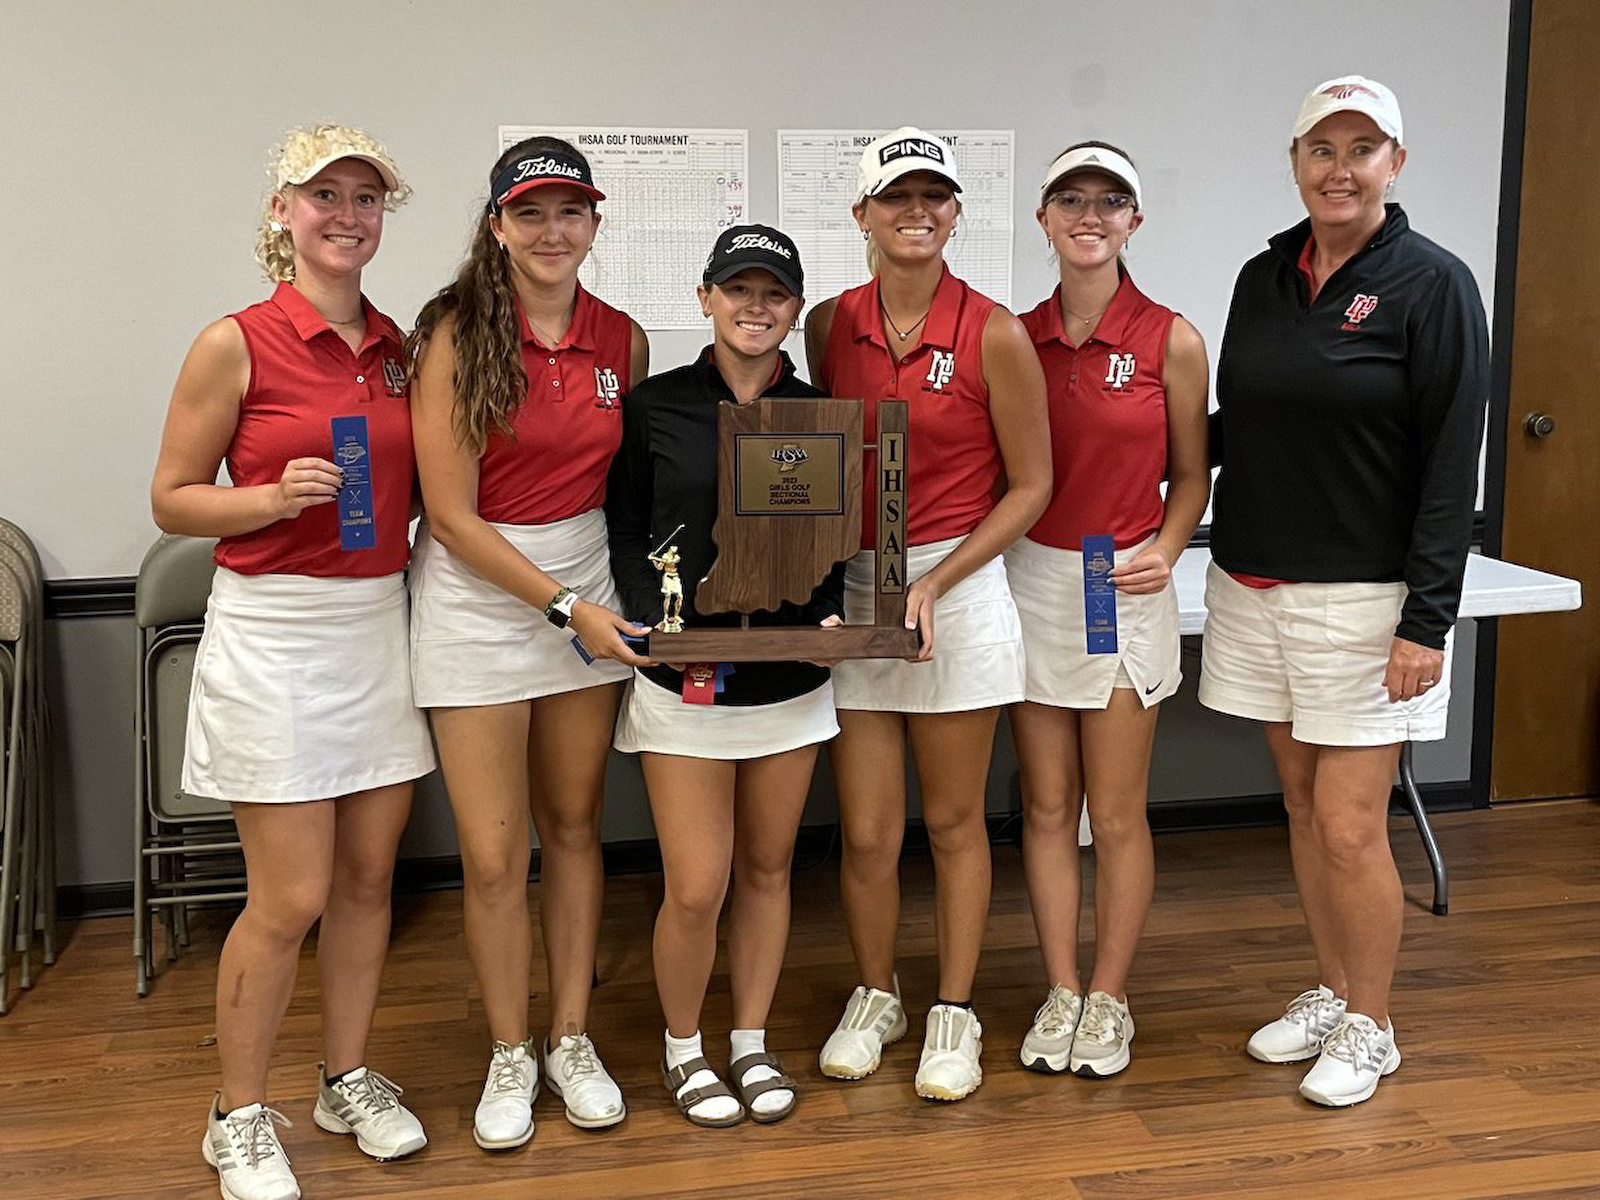 Golf places fourth at regional cover photo